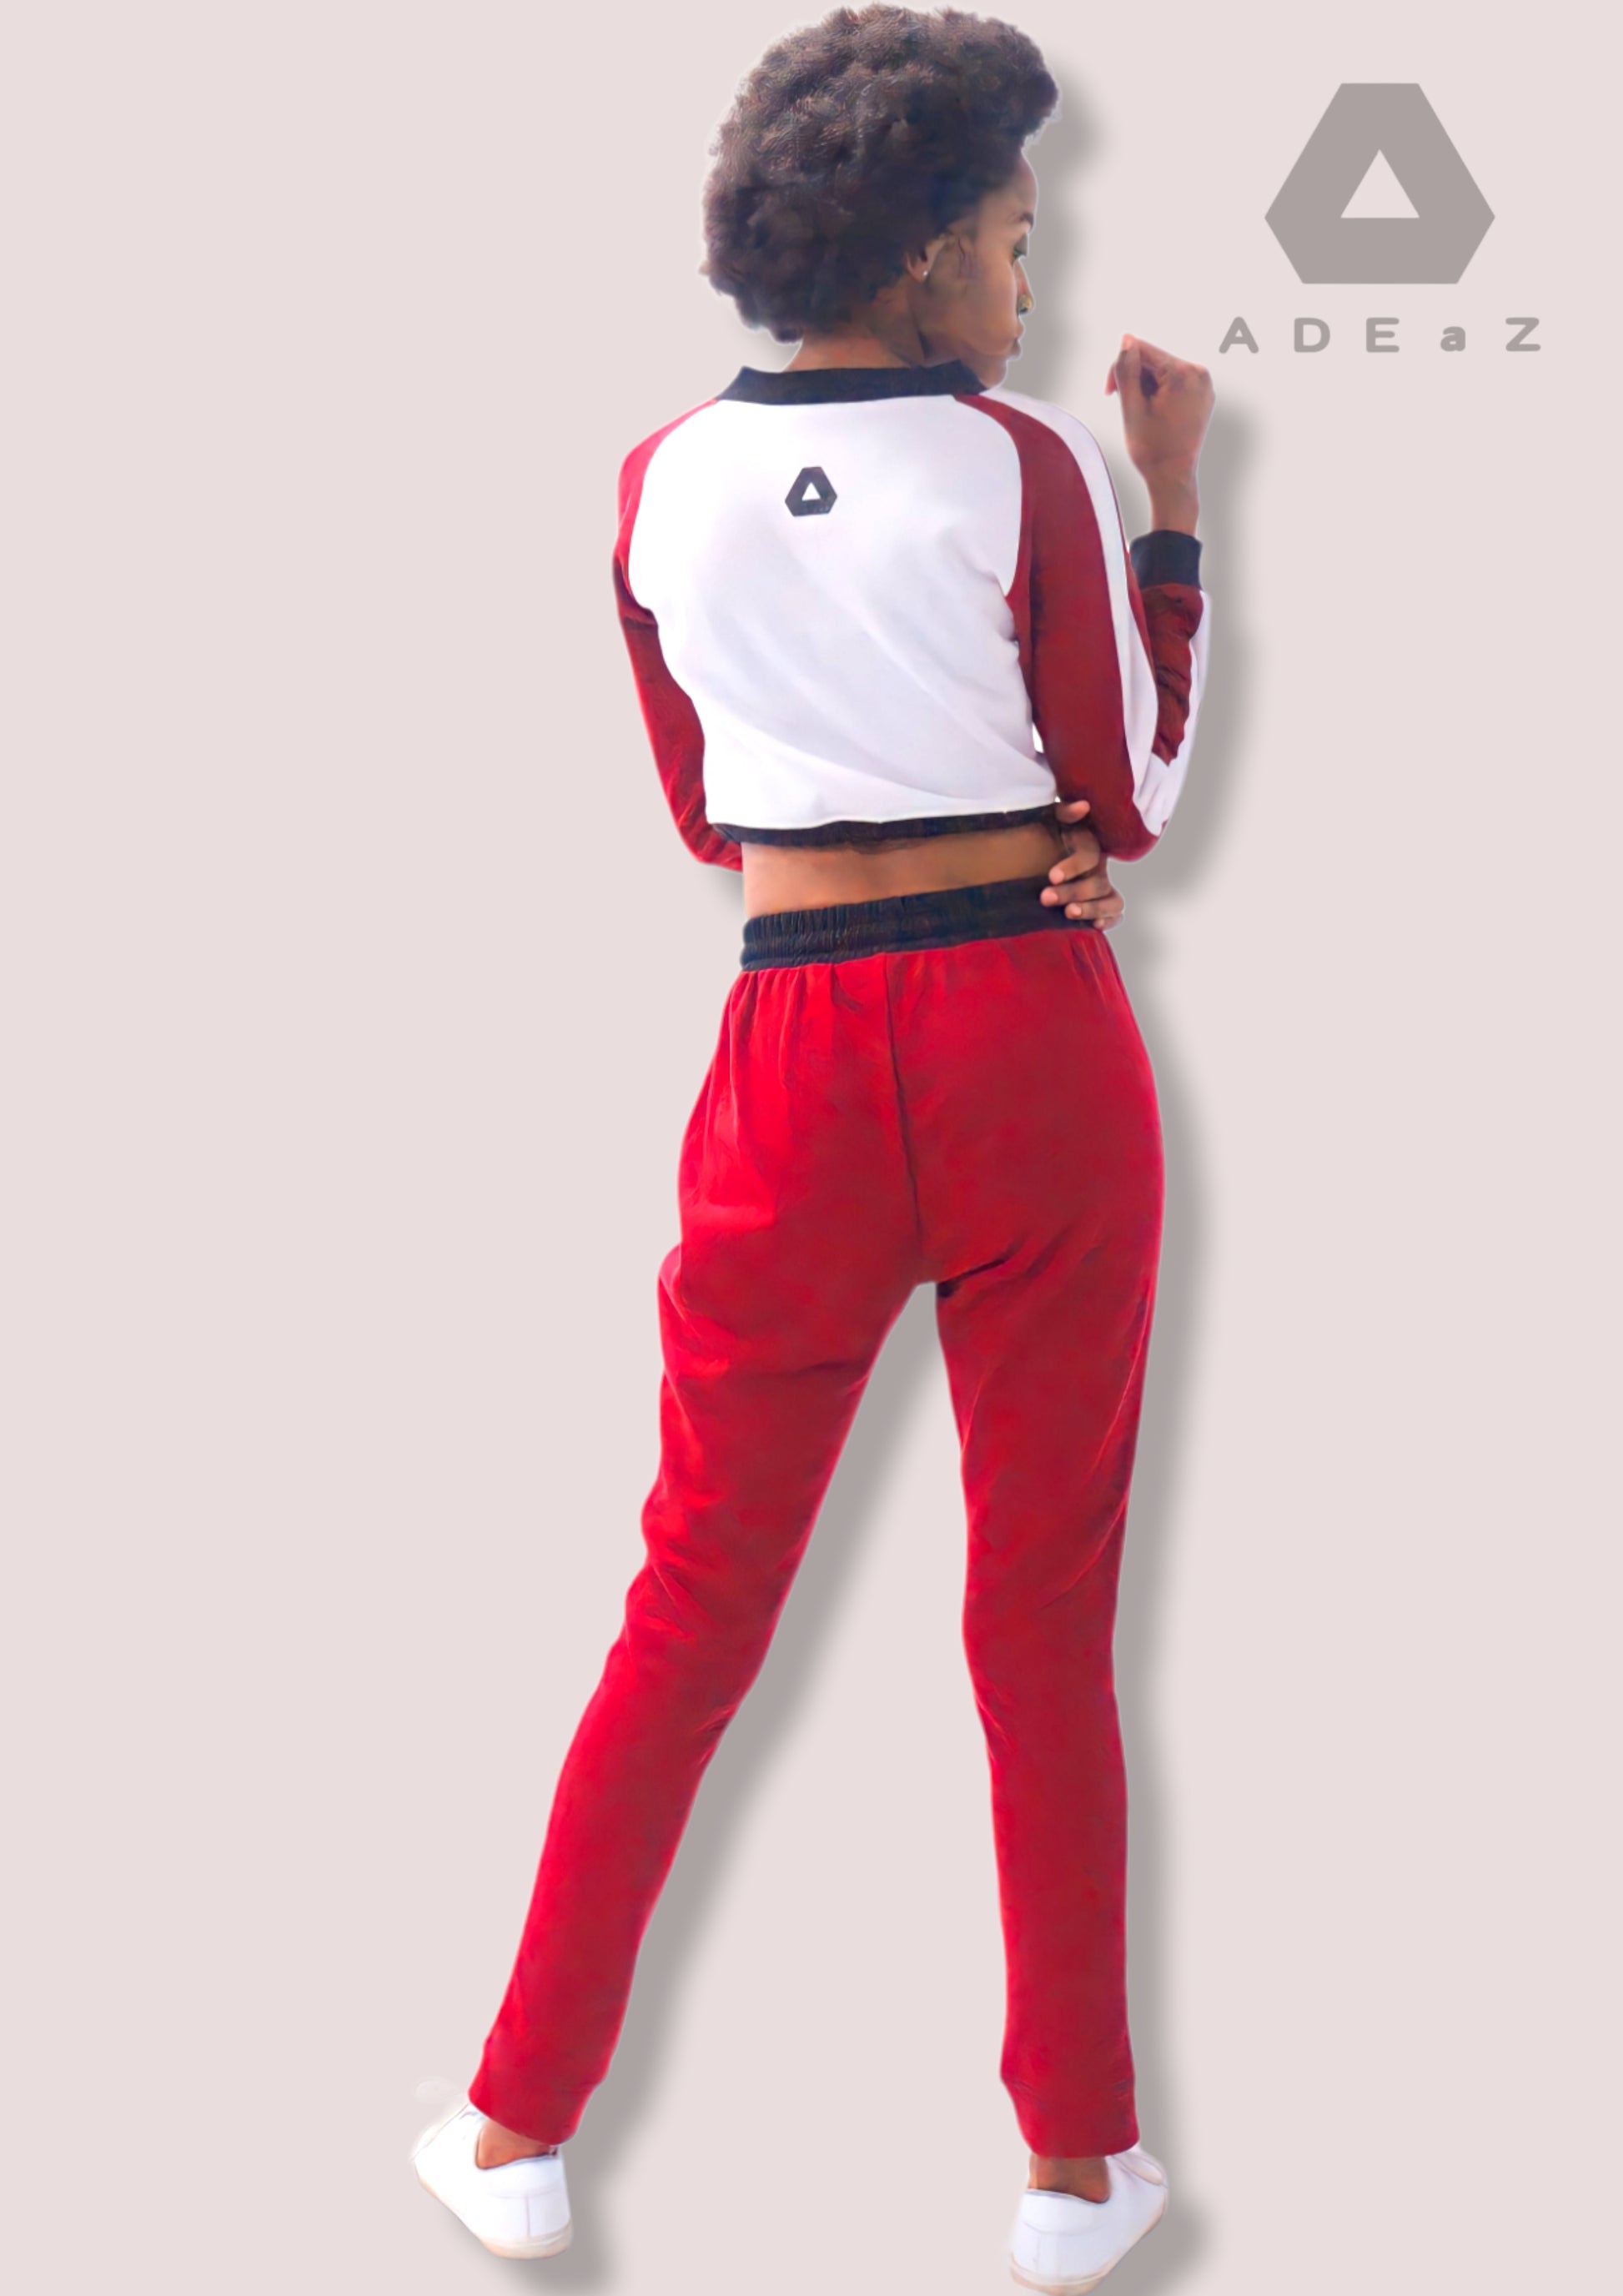 Ladies Fleece Fitted Jogger: Cozy and snug-fitting jogger pants for women, made from fleece material.